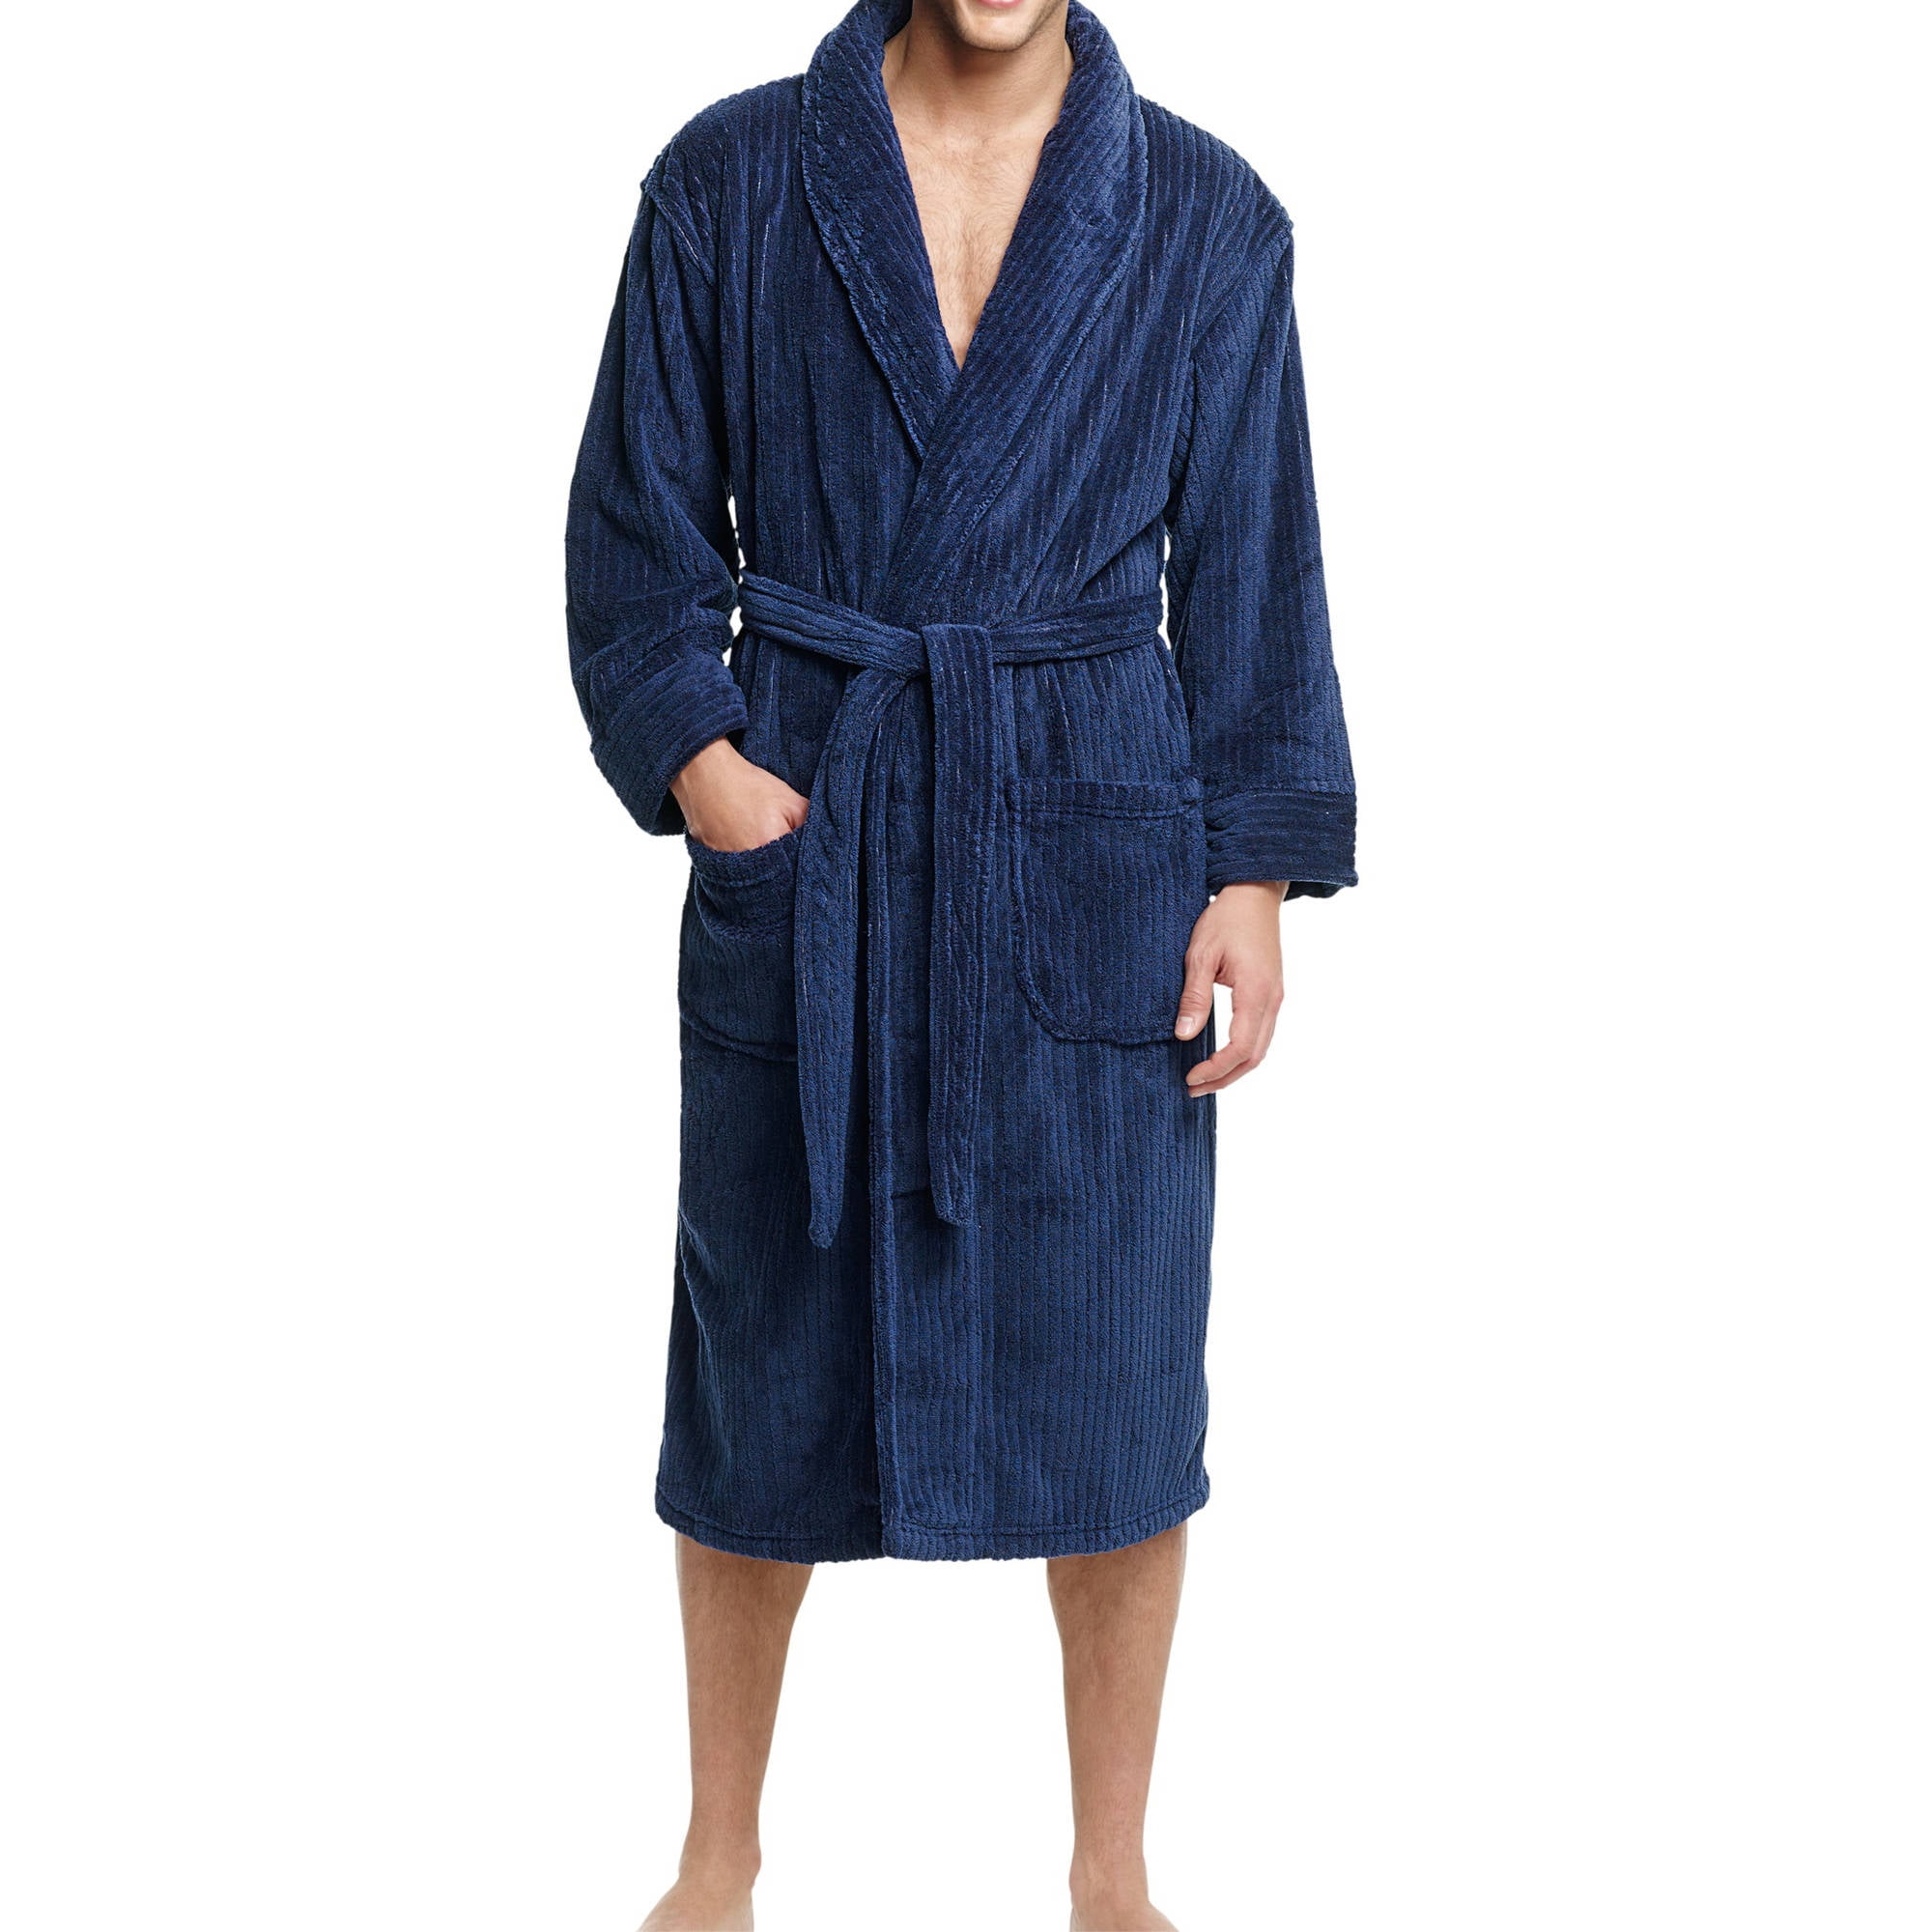 Hanes Mens Flannel Robe Tall Sizes 